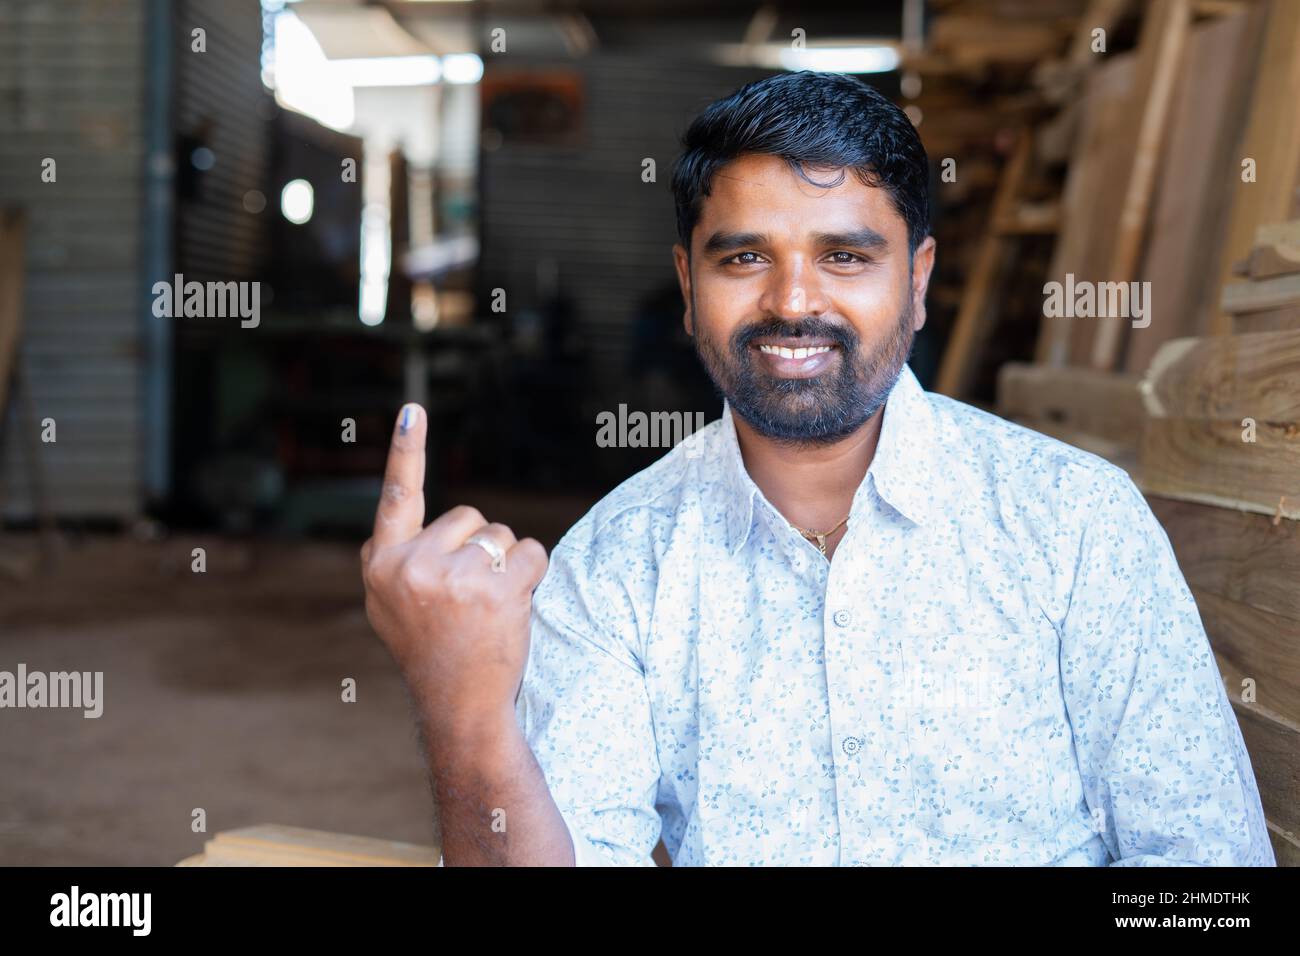 Happy indian carpainter or craftman showing ink marked finger by looking at camera after voting on election - concept of people voting rights Stock Photo